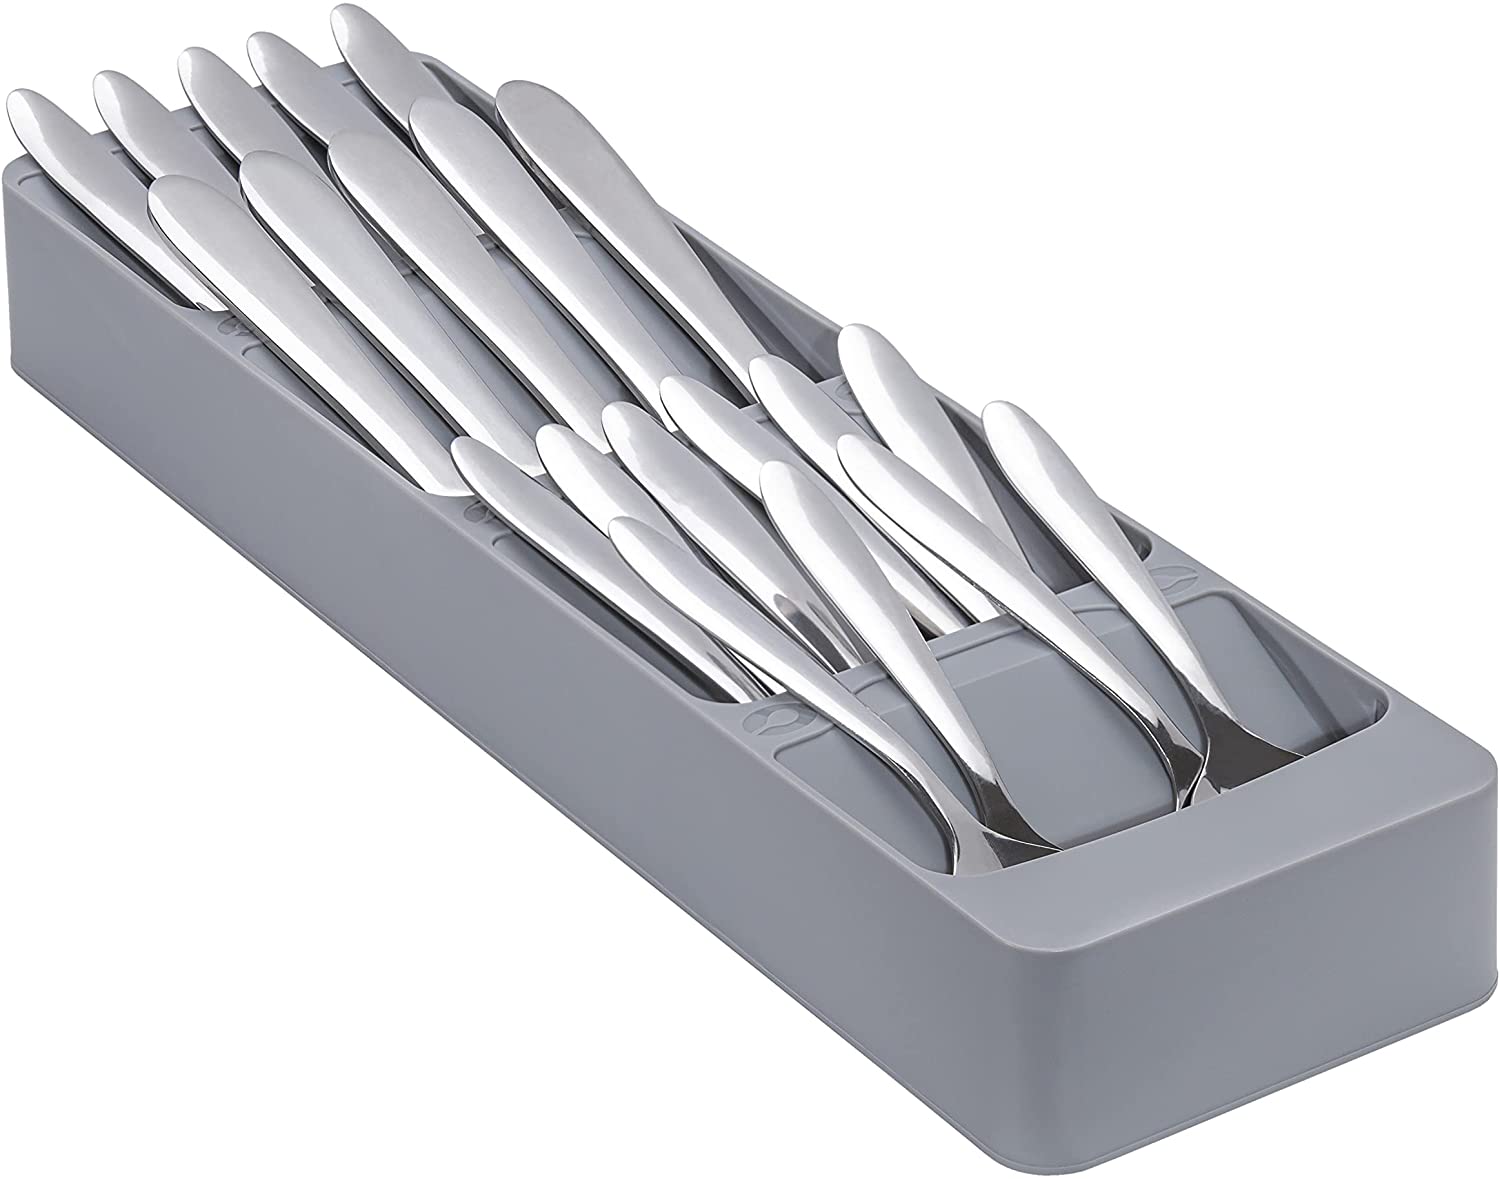 Cheer Collection Kitchen Drawer Knife Organizer - Space Saving Tray to